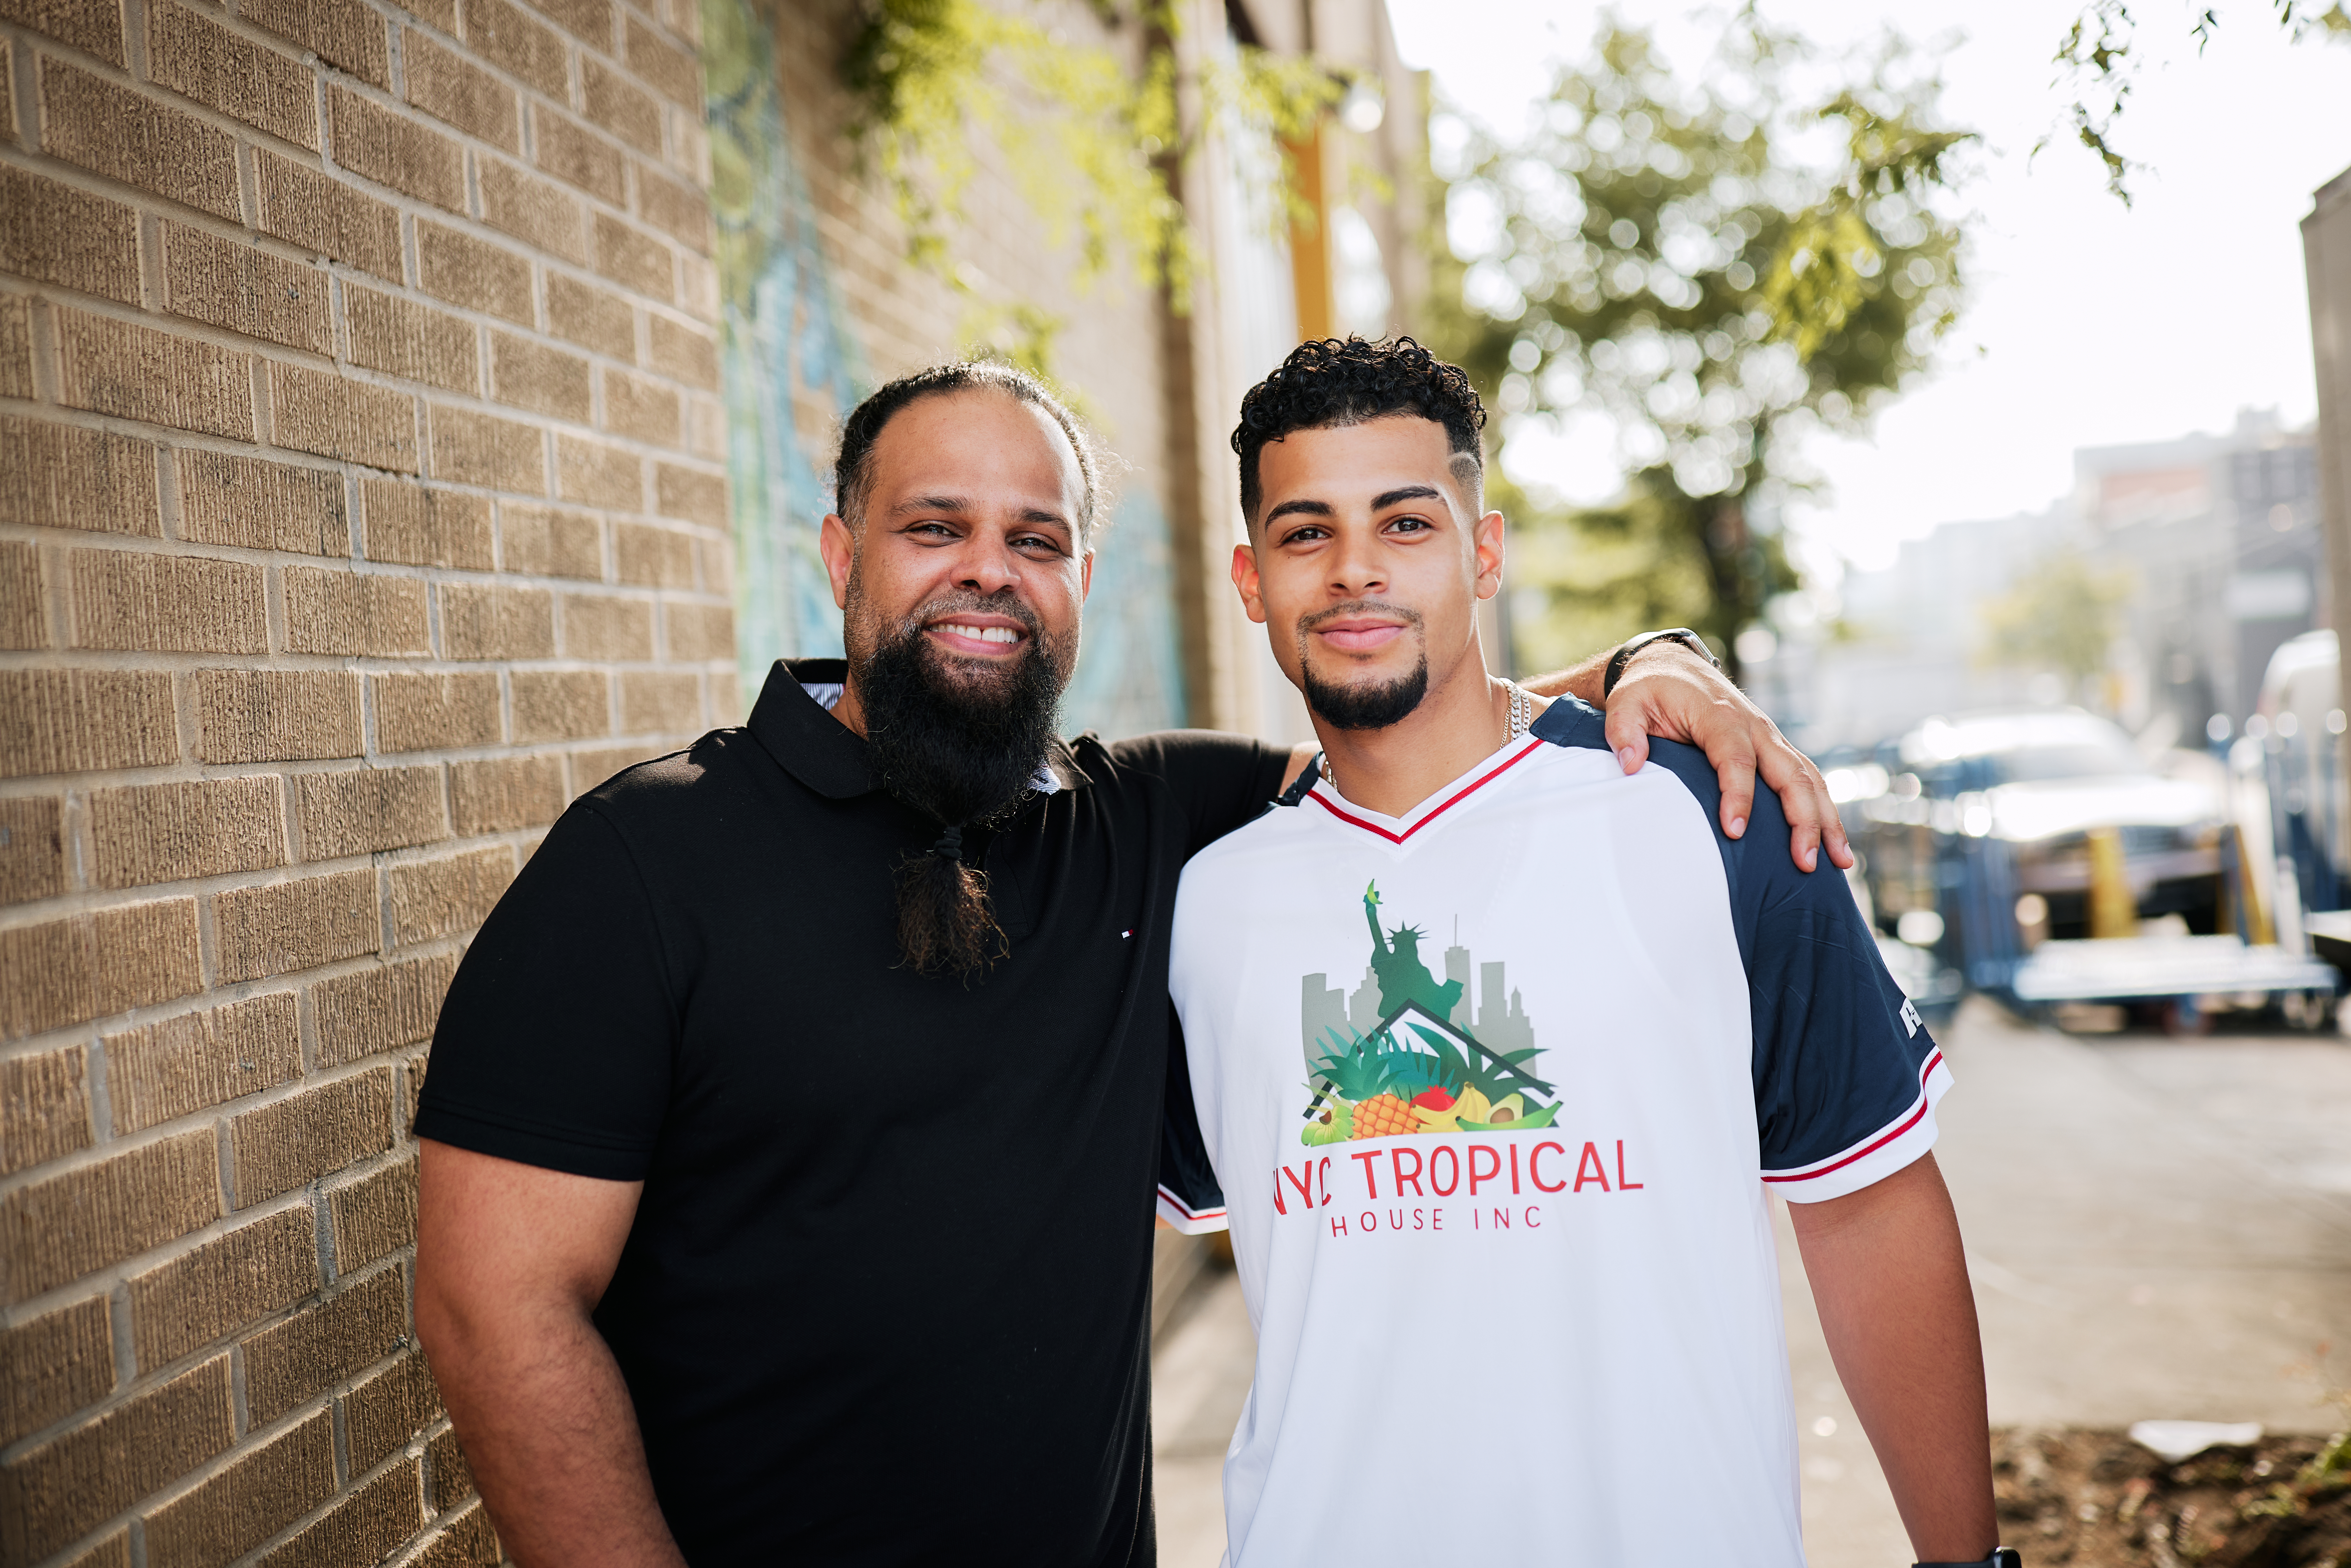 Owner and son of NYC Tropical House